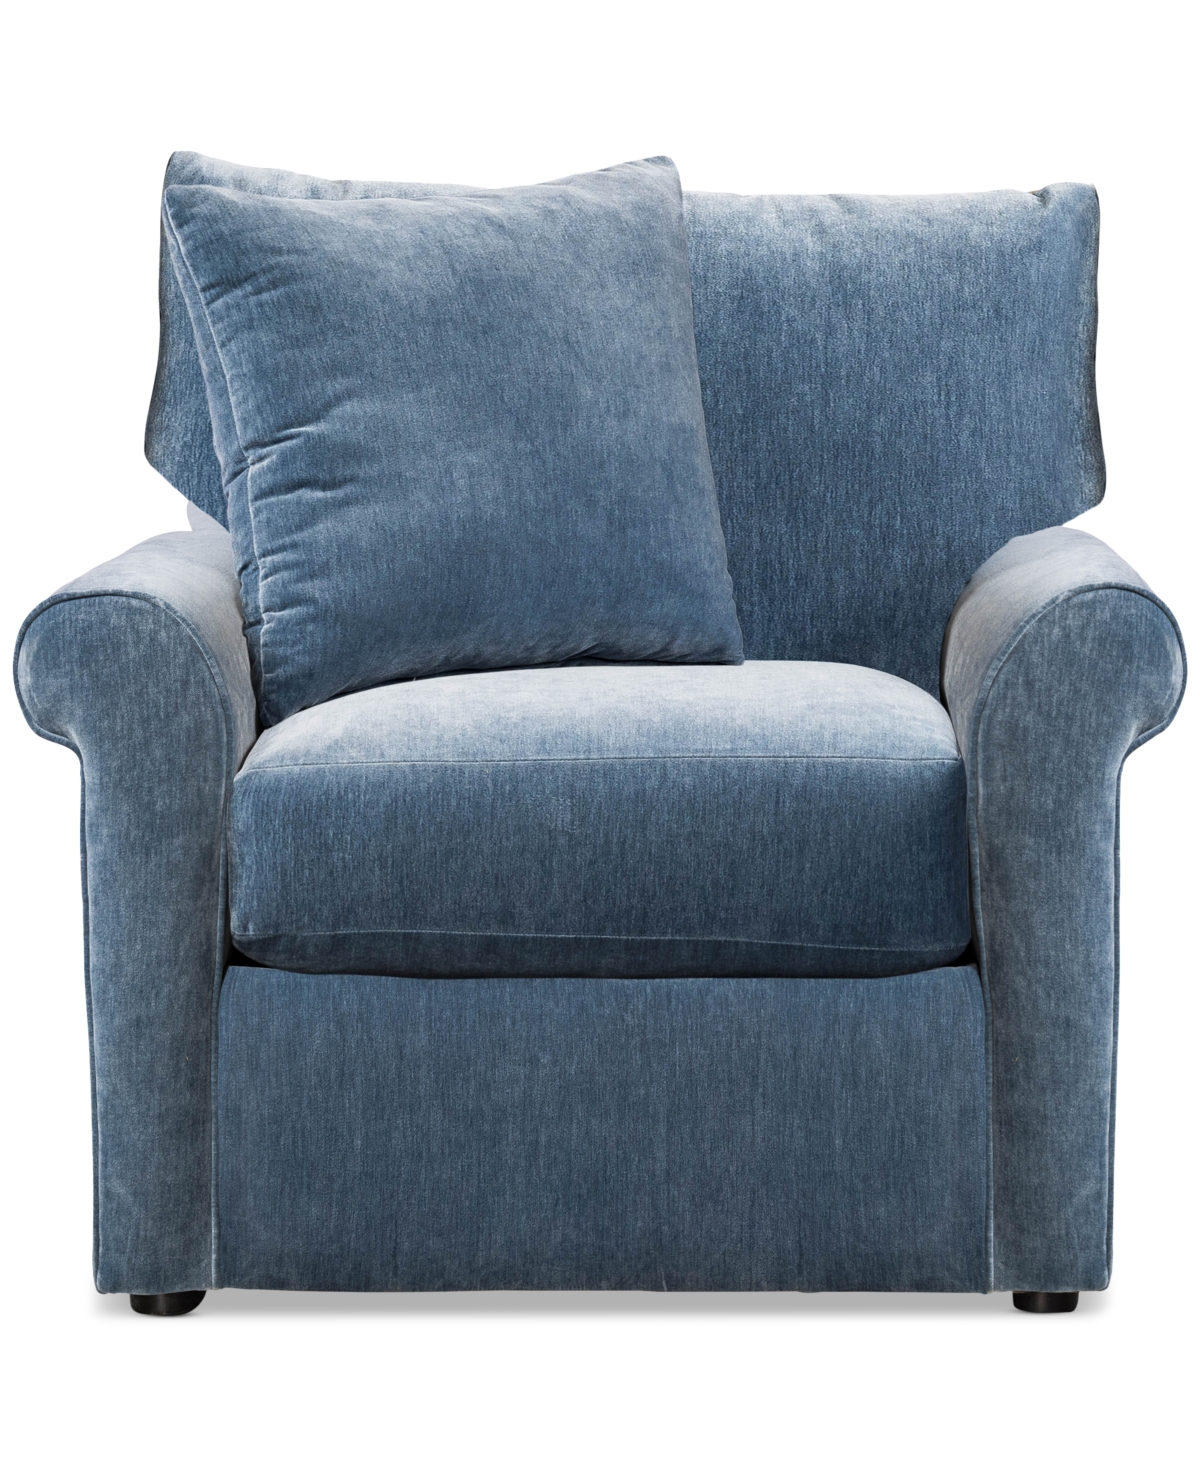 Macy's Wrenley 38" Amici Fabric Arm Chair, Created For  In Denim